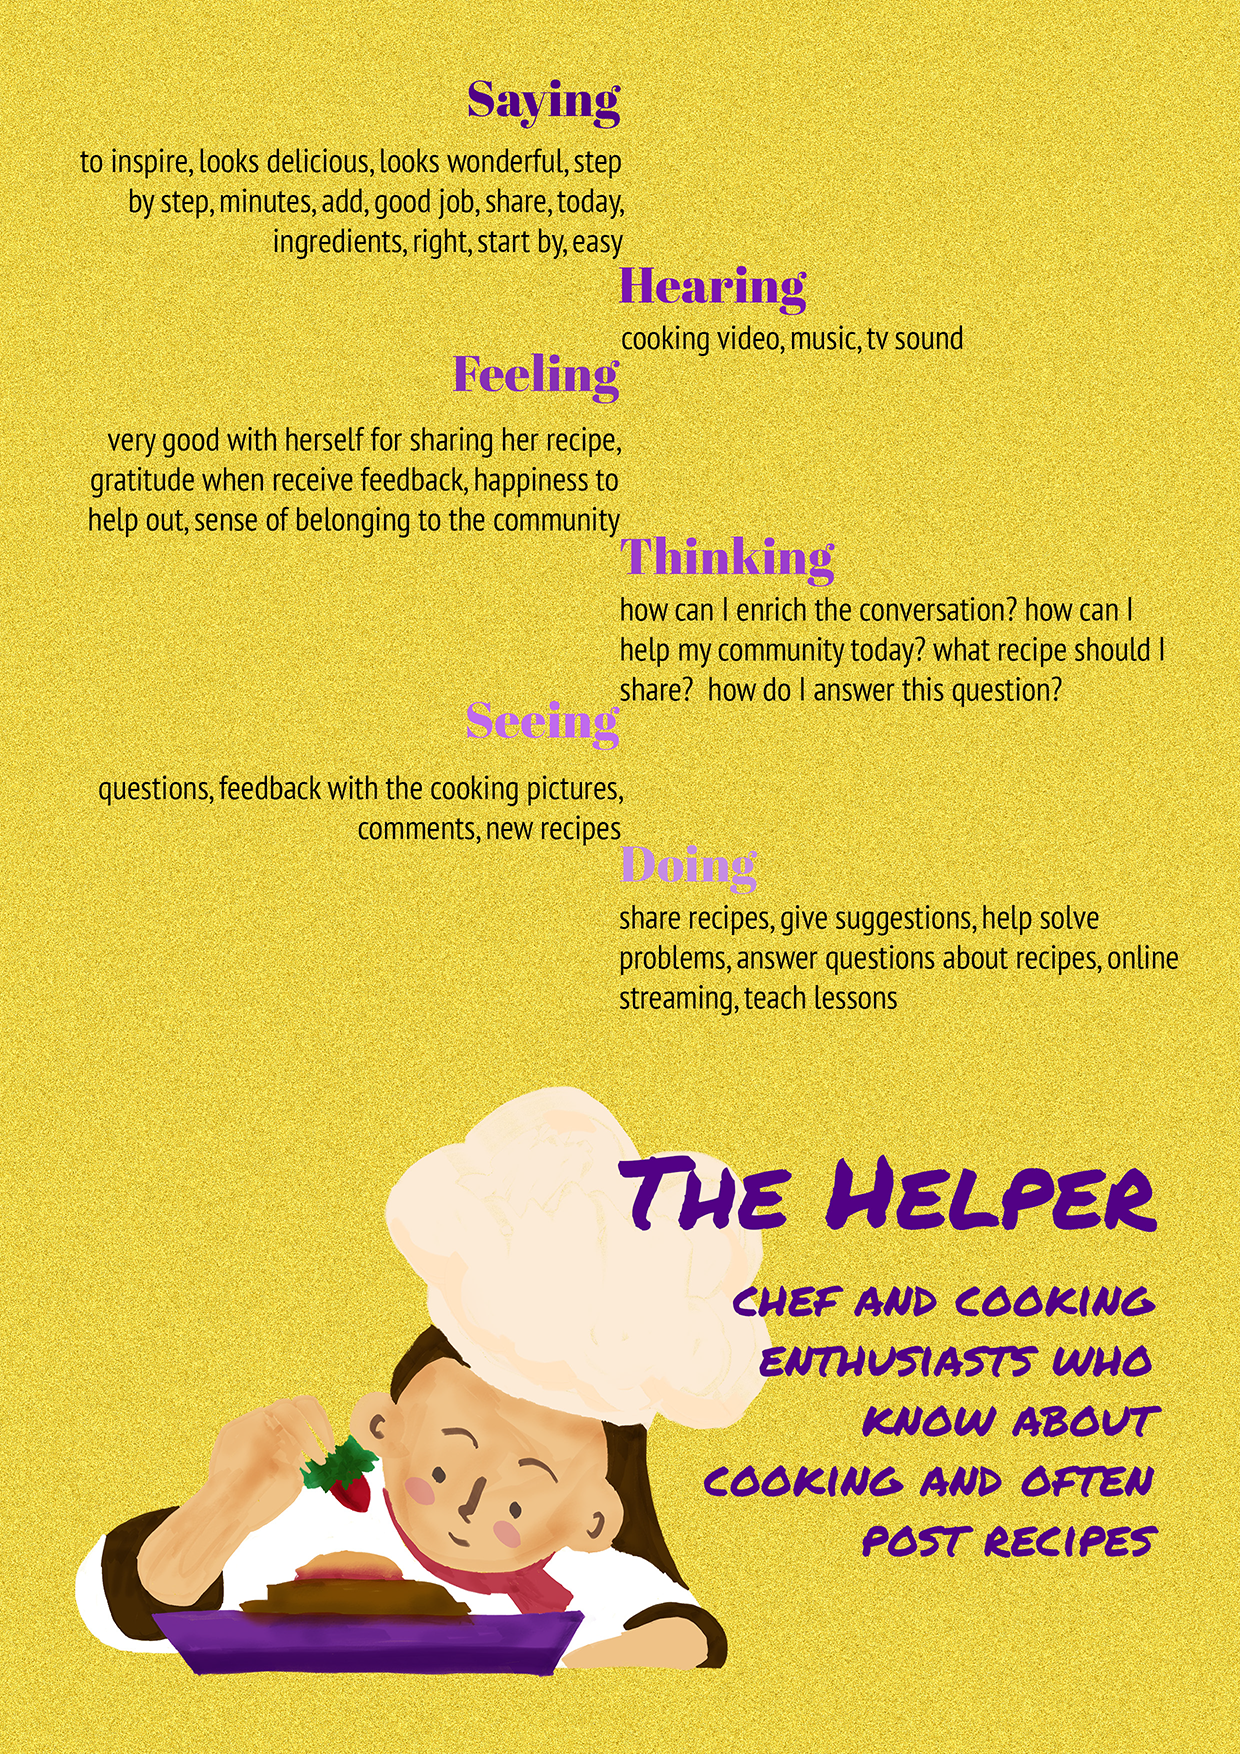 Audience Persona Map 2: The Helper